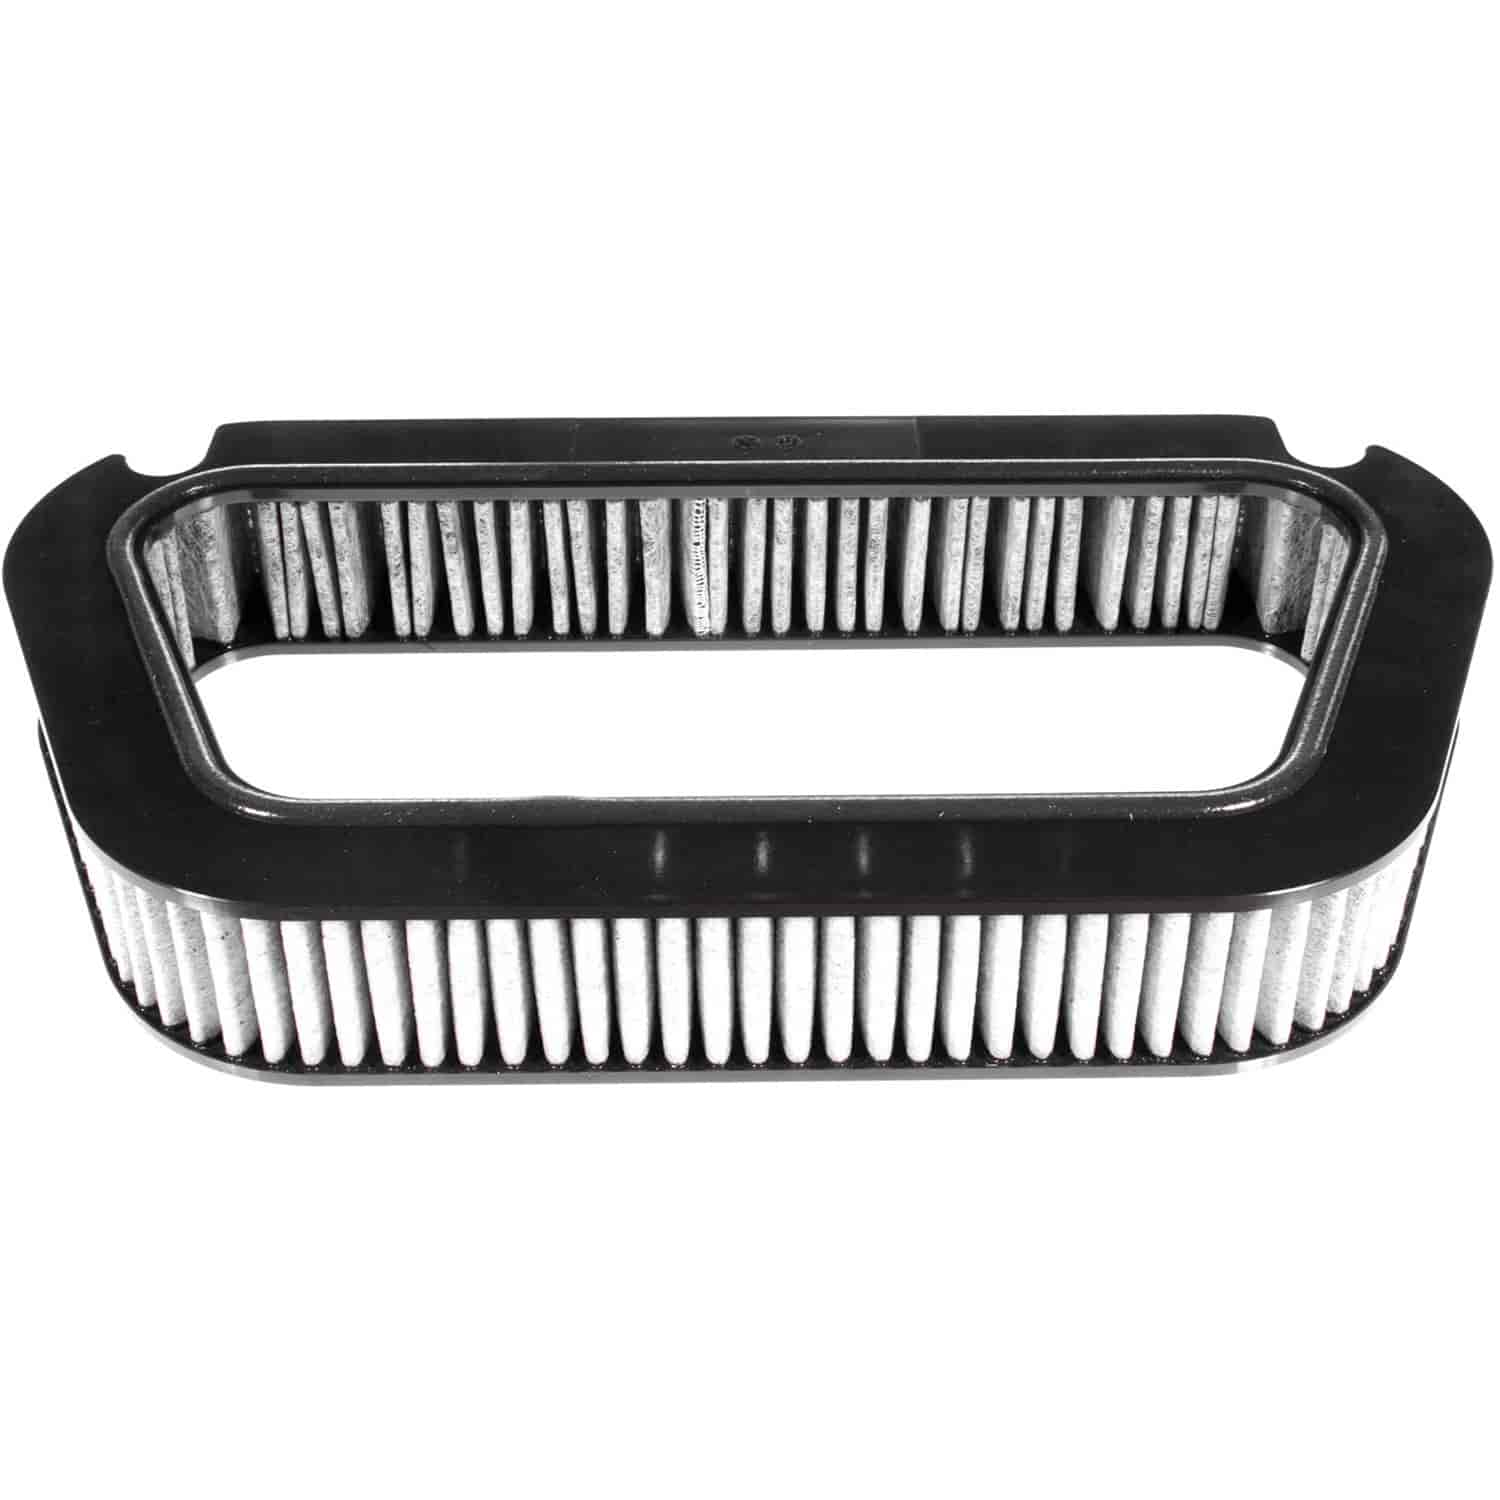 Mahle Cabin Air Filter Audi A8 4.2L and 6.0L Audi S8 4.2L and 5.2L 2005-2010